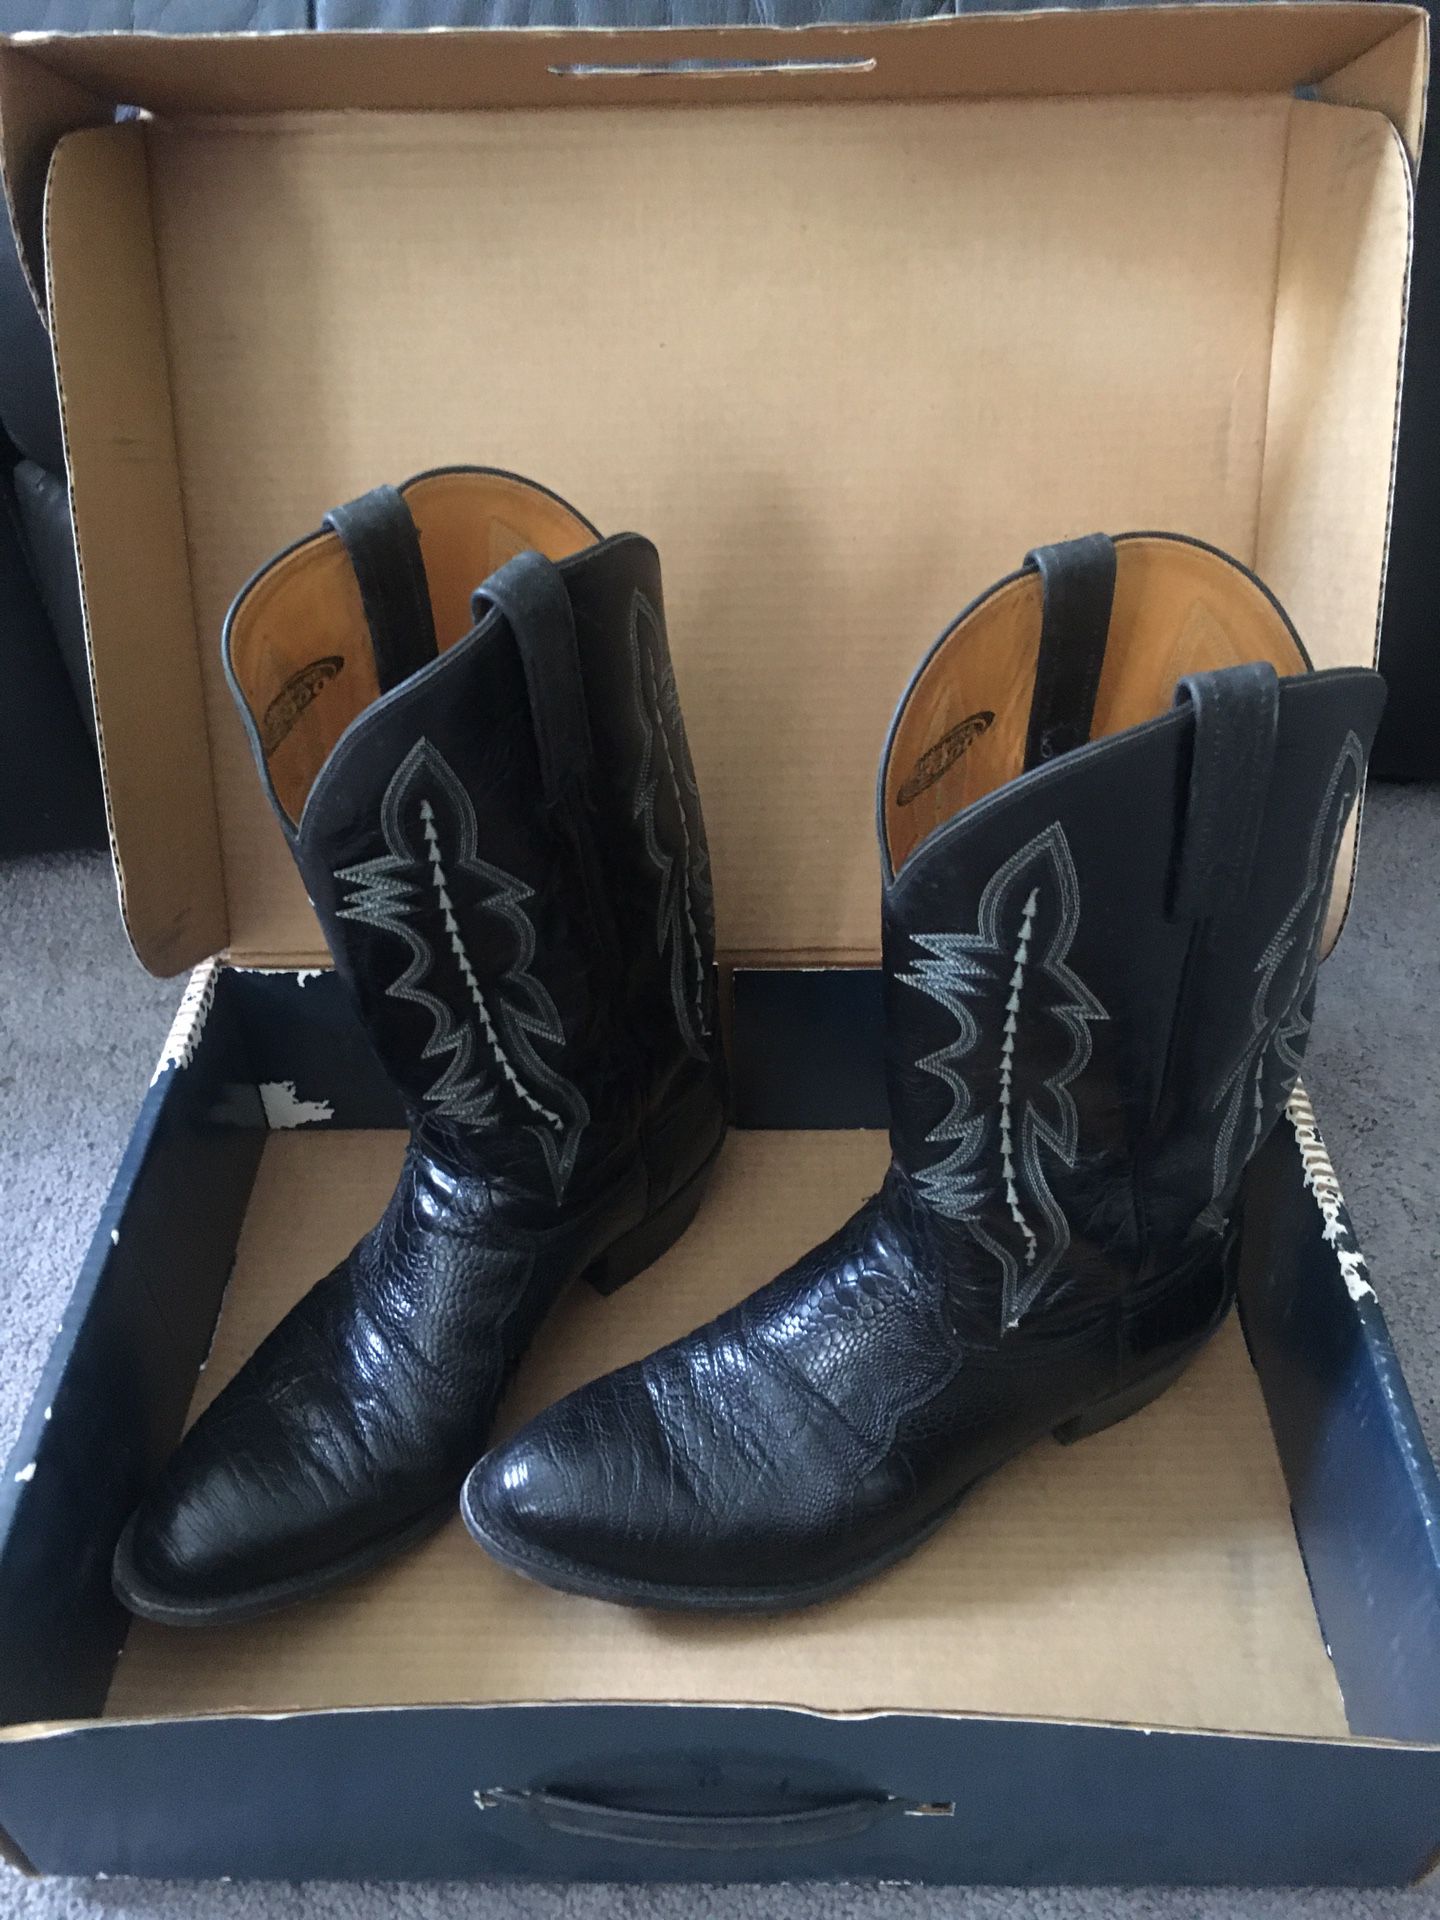 Lucchese 2000 Black Ostrich Shoulder Boots size 11.5